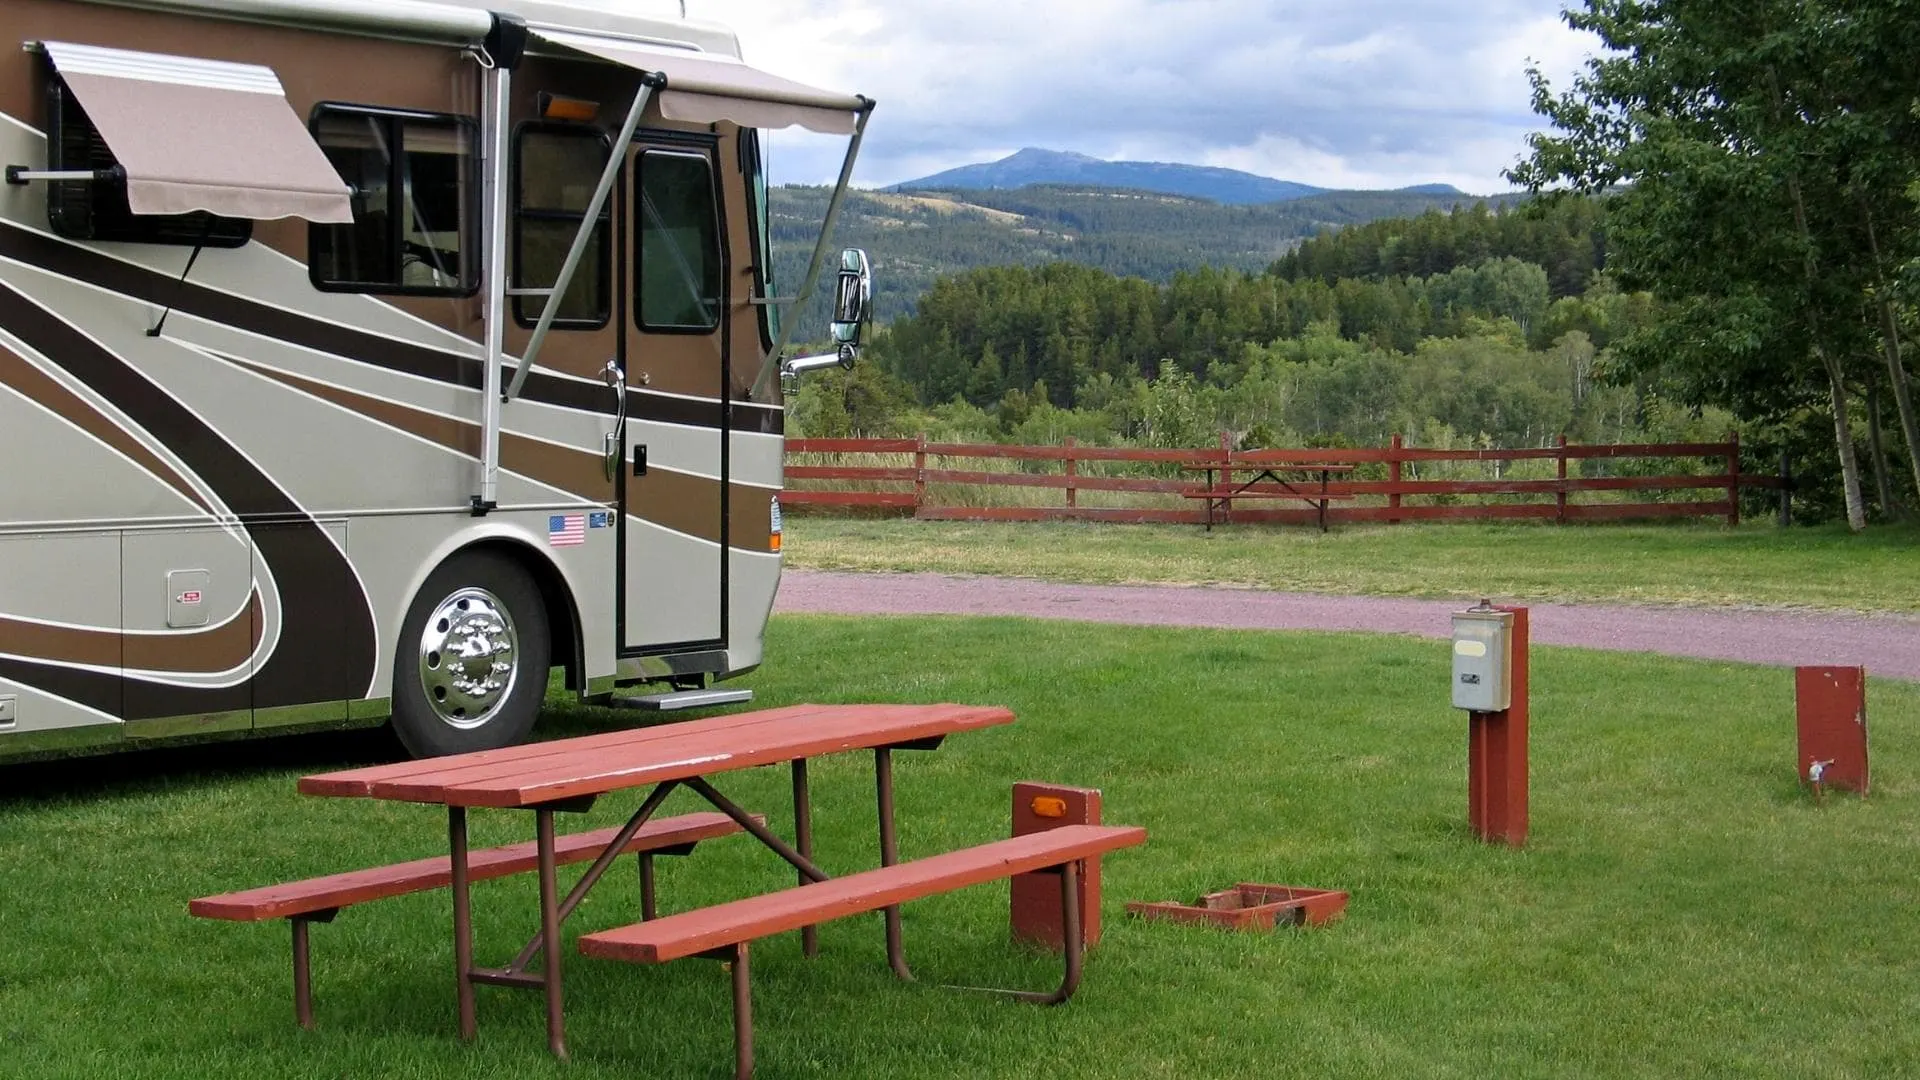 A motorhome in an RV park, a very big part some RVers' full-time RV living expenses